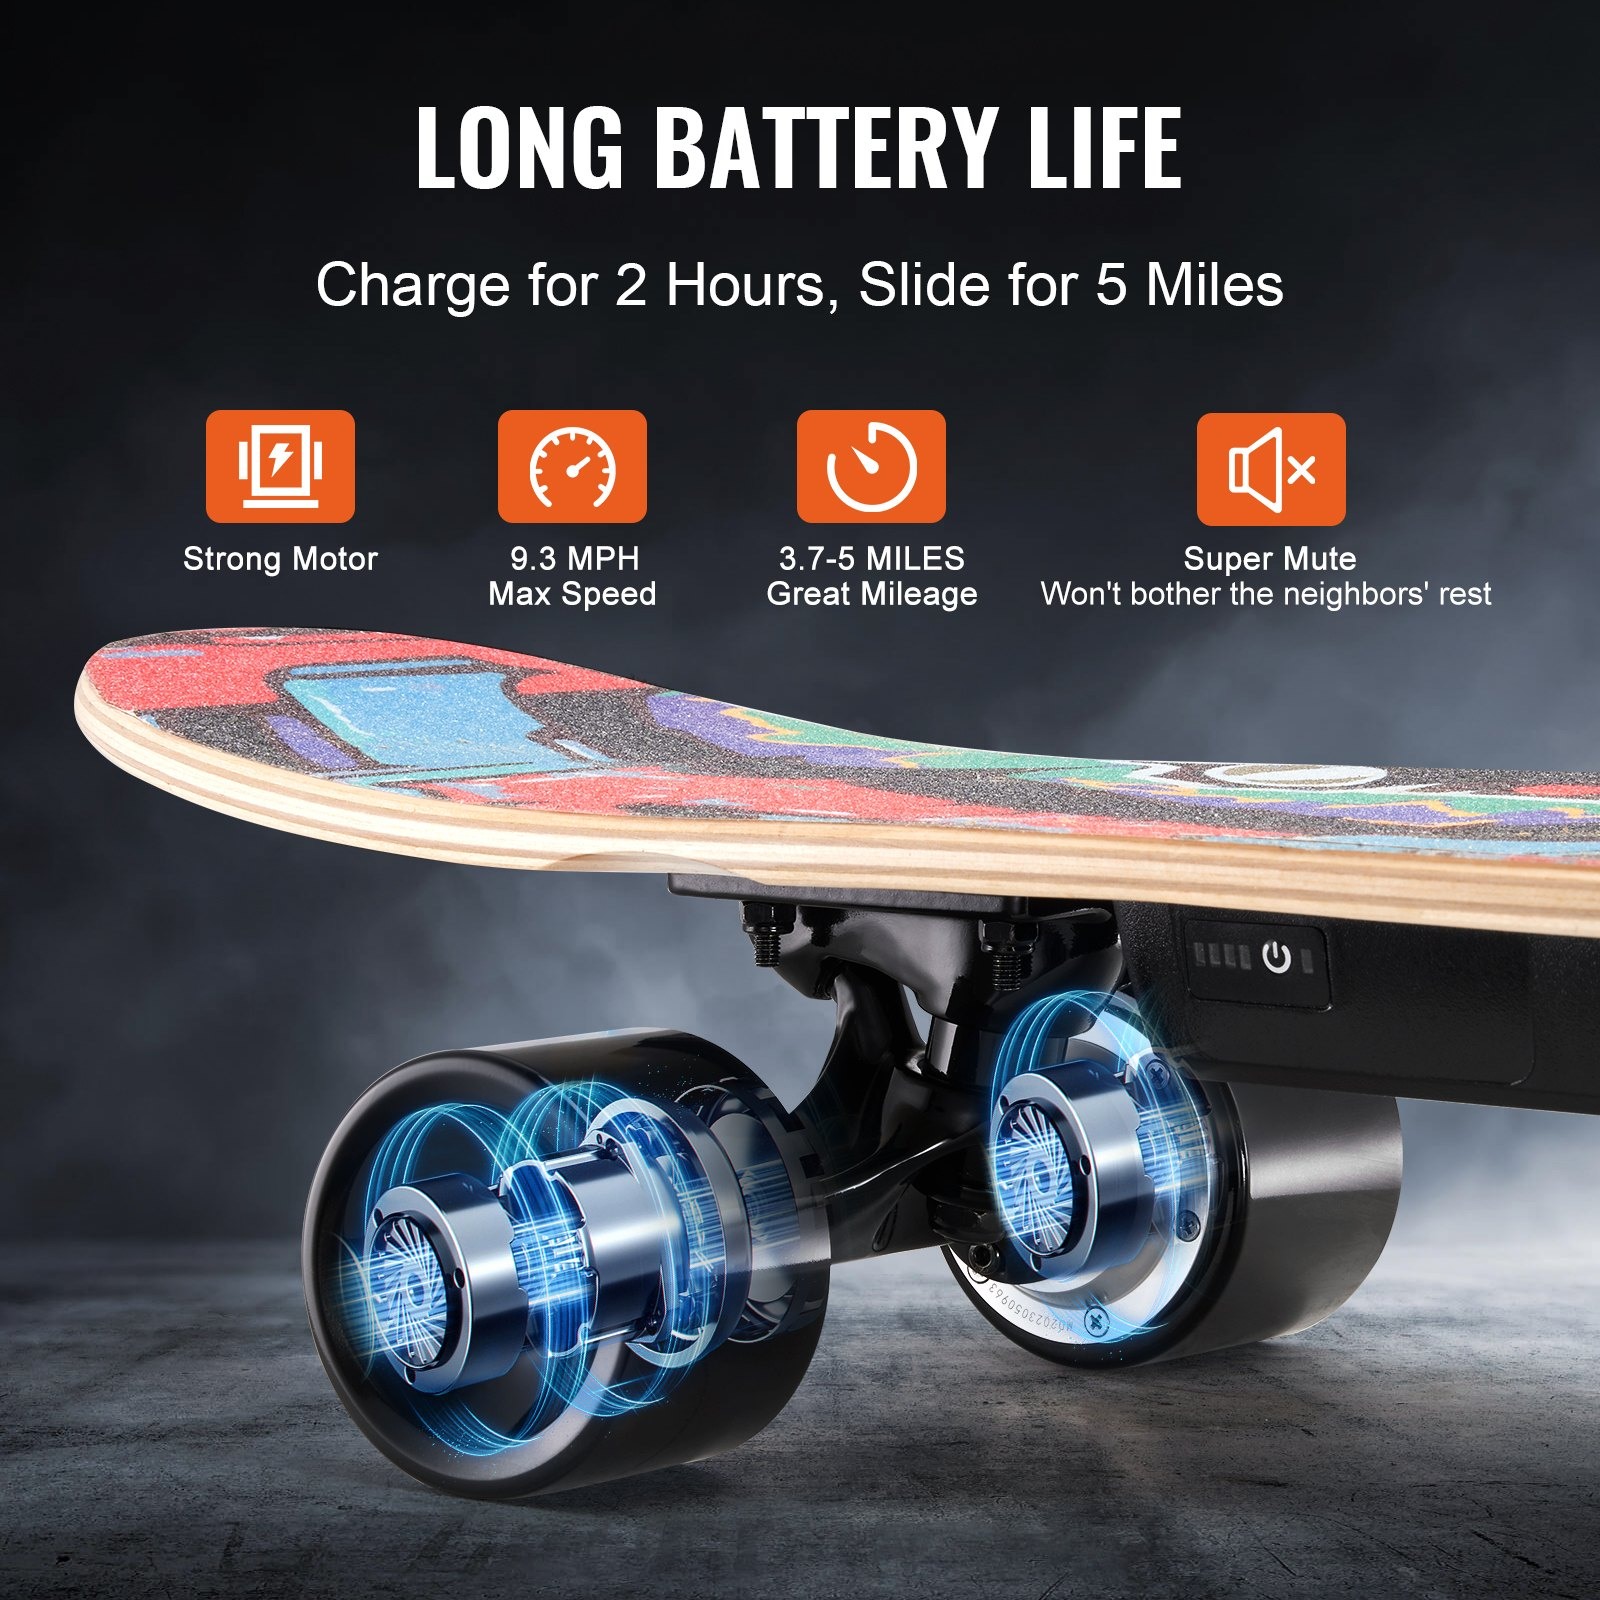 VEVOR Electric Longboard Skateboard with Control | 5 Miles Range for Adults & Kids, Goodies N Stuff